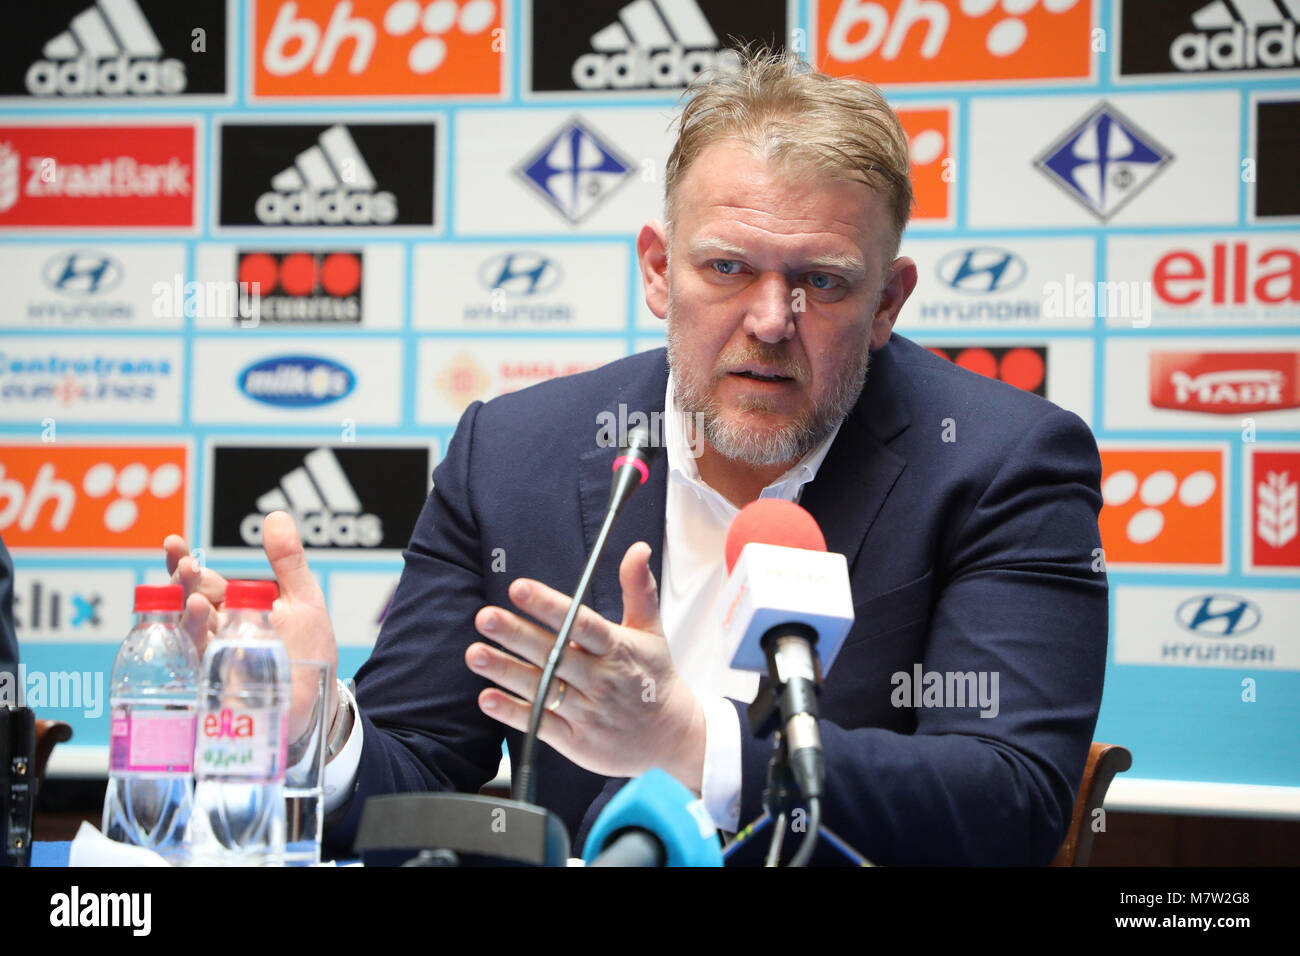 (180313) -- SARAJEVO, March 13, 2018 (Xinhua) -- Head coach of the national football team of Bosnia and Herzegovina (BiH) Robert Prosinecki attends a press conference in Sarajevo, BiH, on March 13, 2018. Prosinecki officially announced on Tuesday the names of players for the friendly matches against Bulgaria in Razgrad on March 23 and against Senegal in Le Havre on March 27. (Xinhua/Haris Memija) Stock Photo